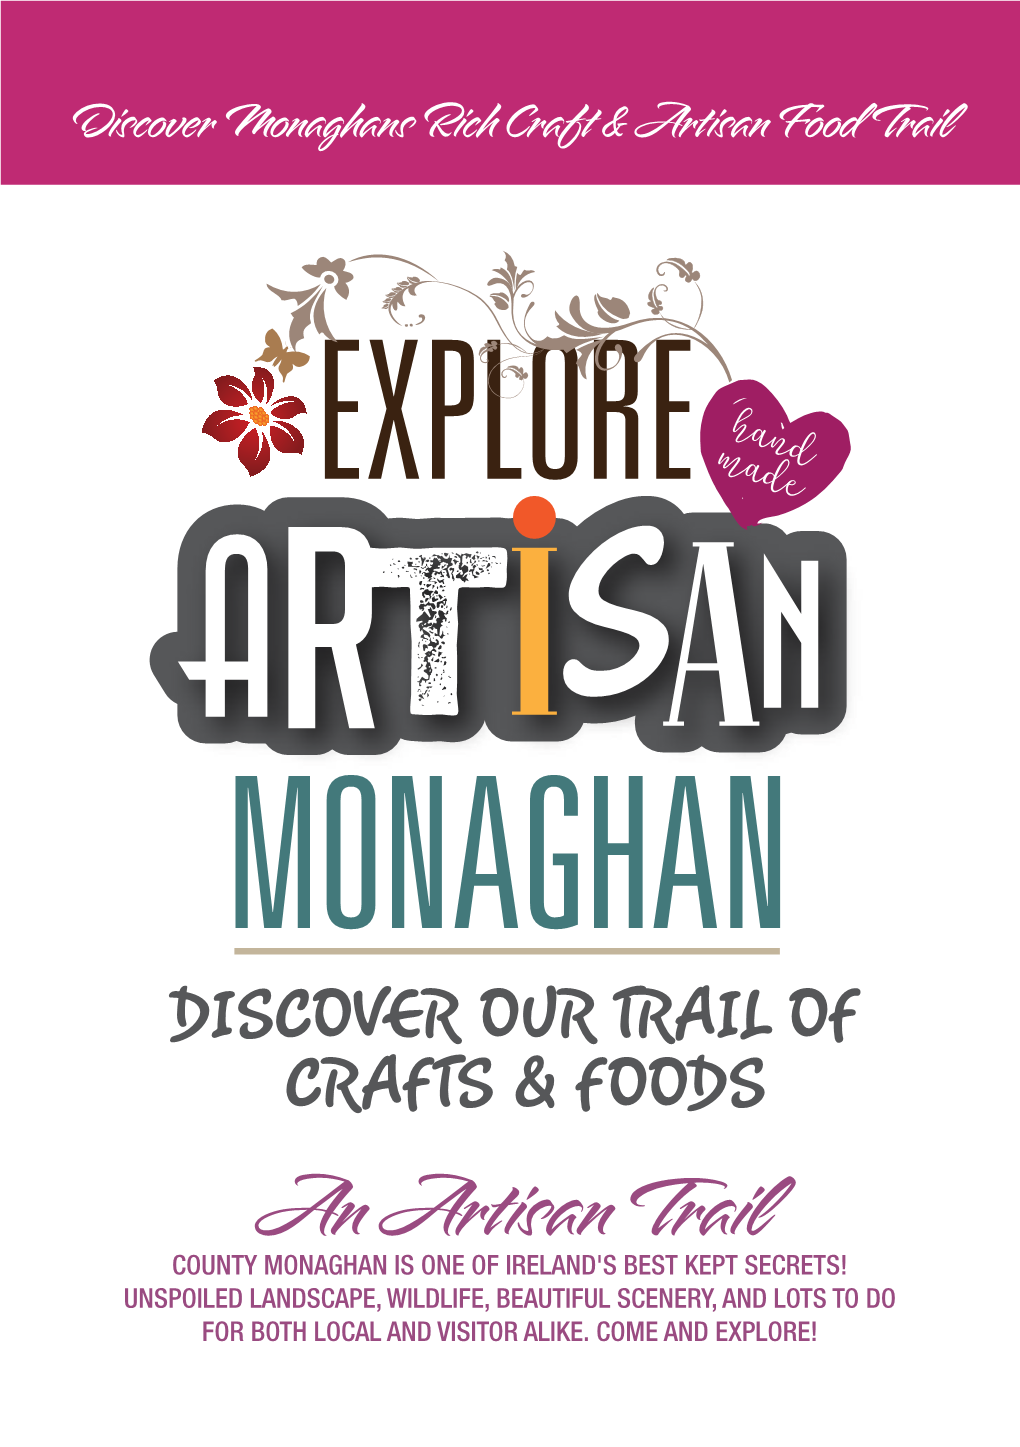 Discover Monaghans Rich Craft & Artisan Food Trail